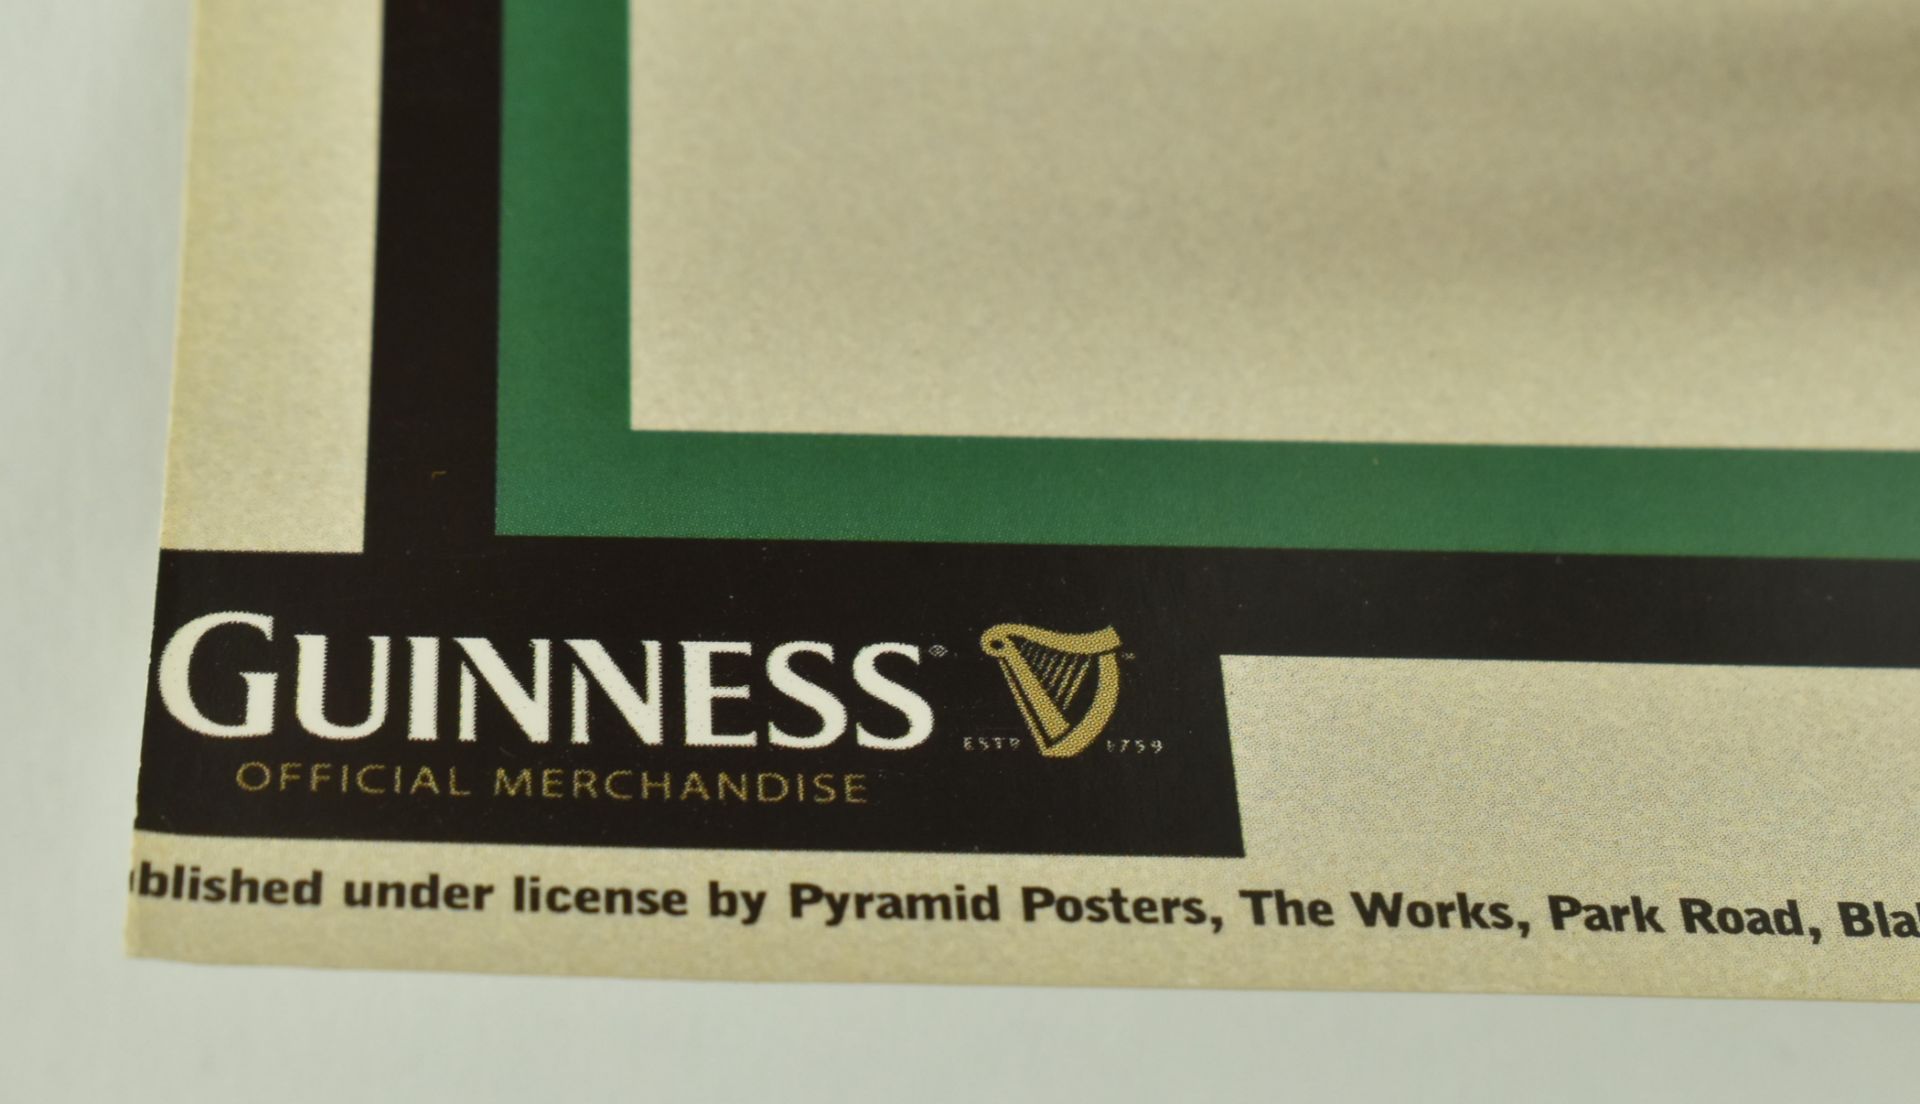 VINTAGE ADVERTISING - MY GOODNESS MY GUINNESS POSTER - Image 5 of 5